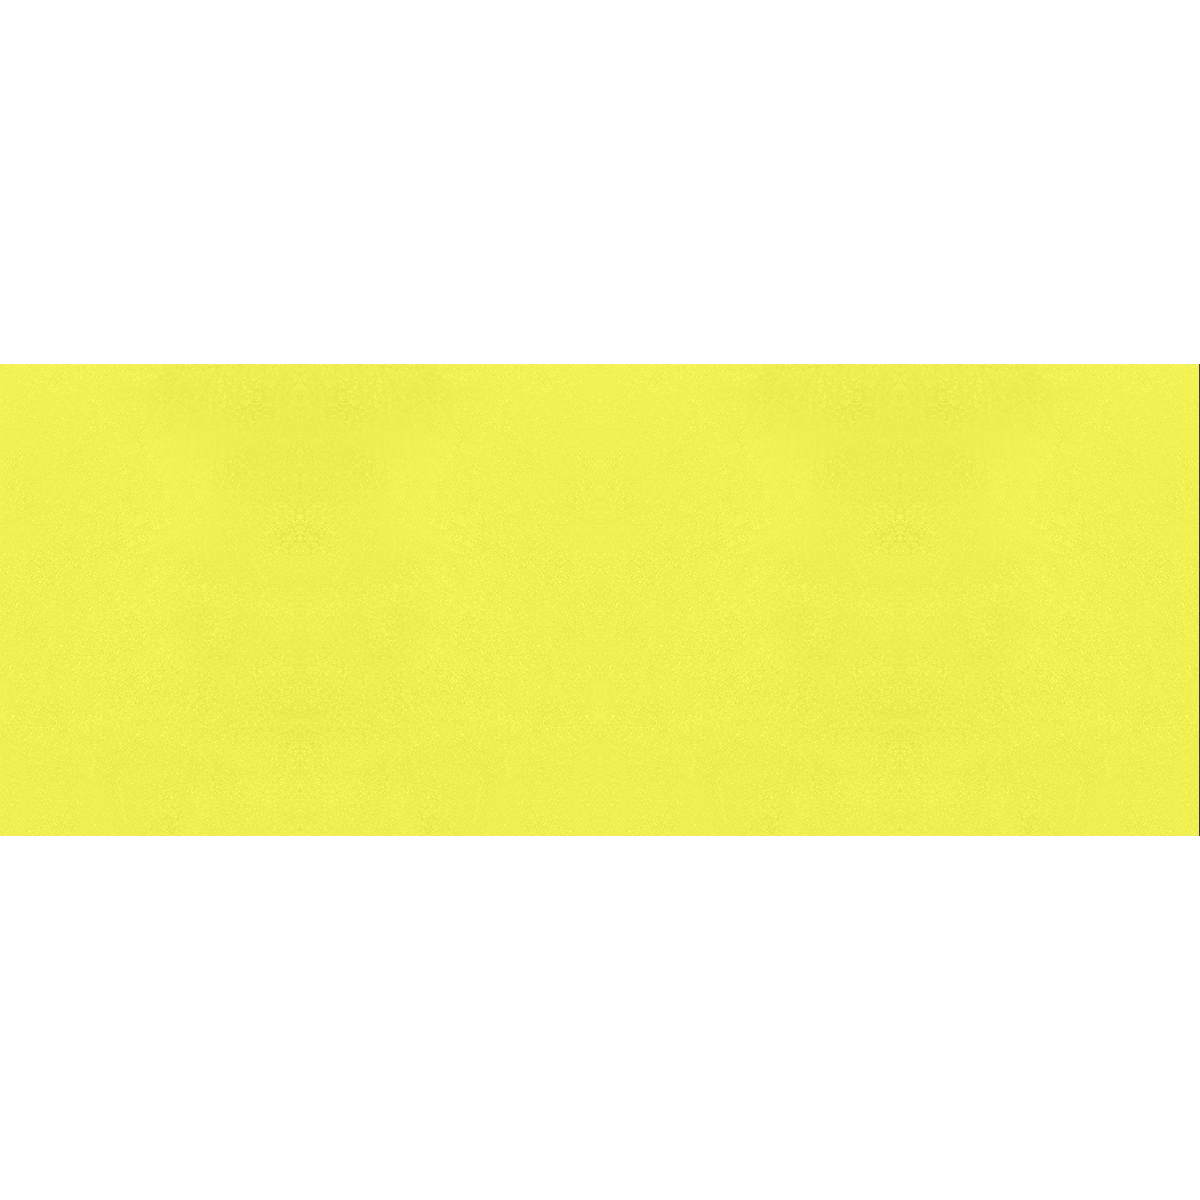 color maximum yellow Gift Wrapping Paper 58"x 23" (1 Roll)